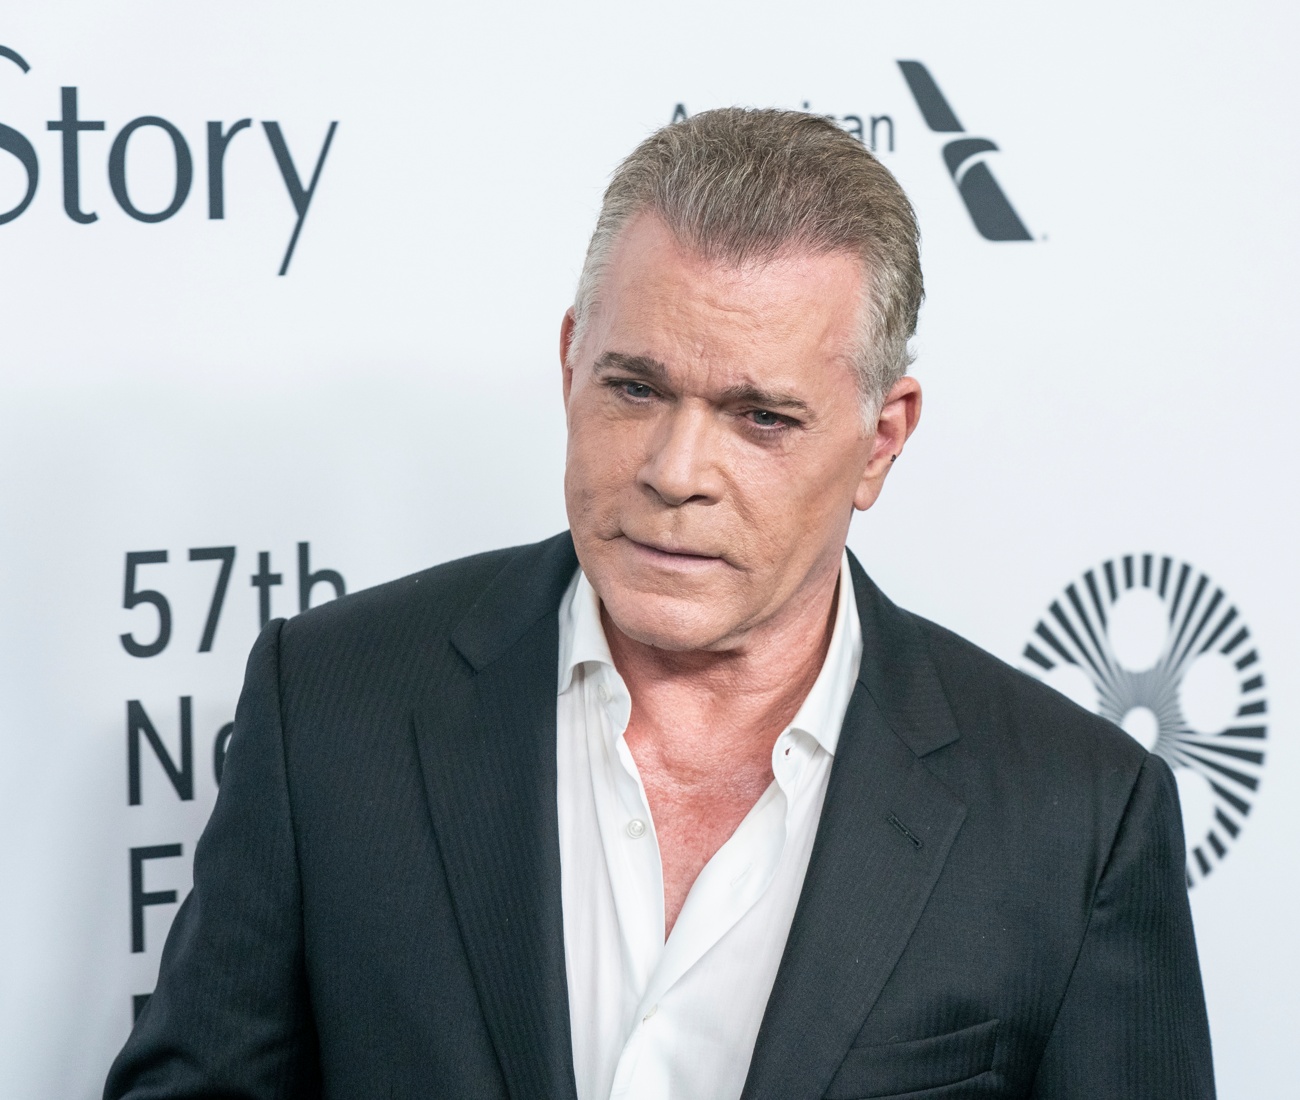 Liotta was 67 years old